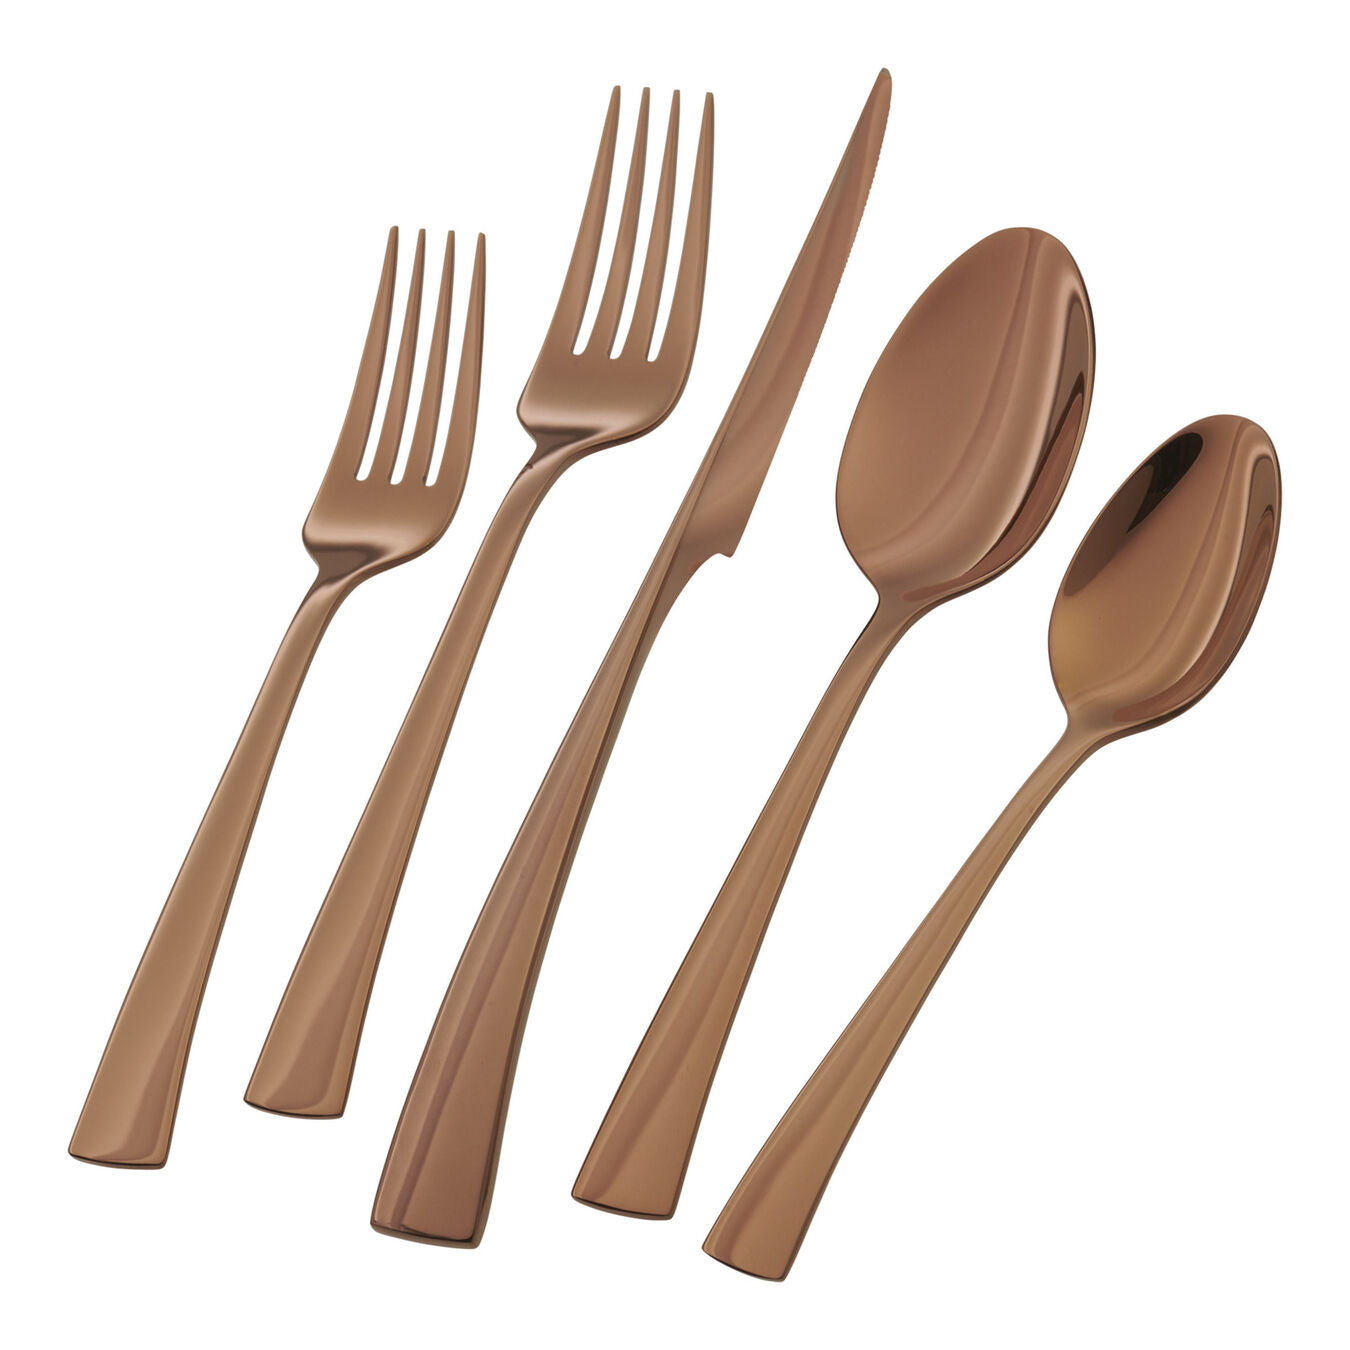 5 pieces of the bellasera rose gold flatware set displayed on a white background